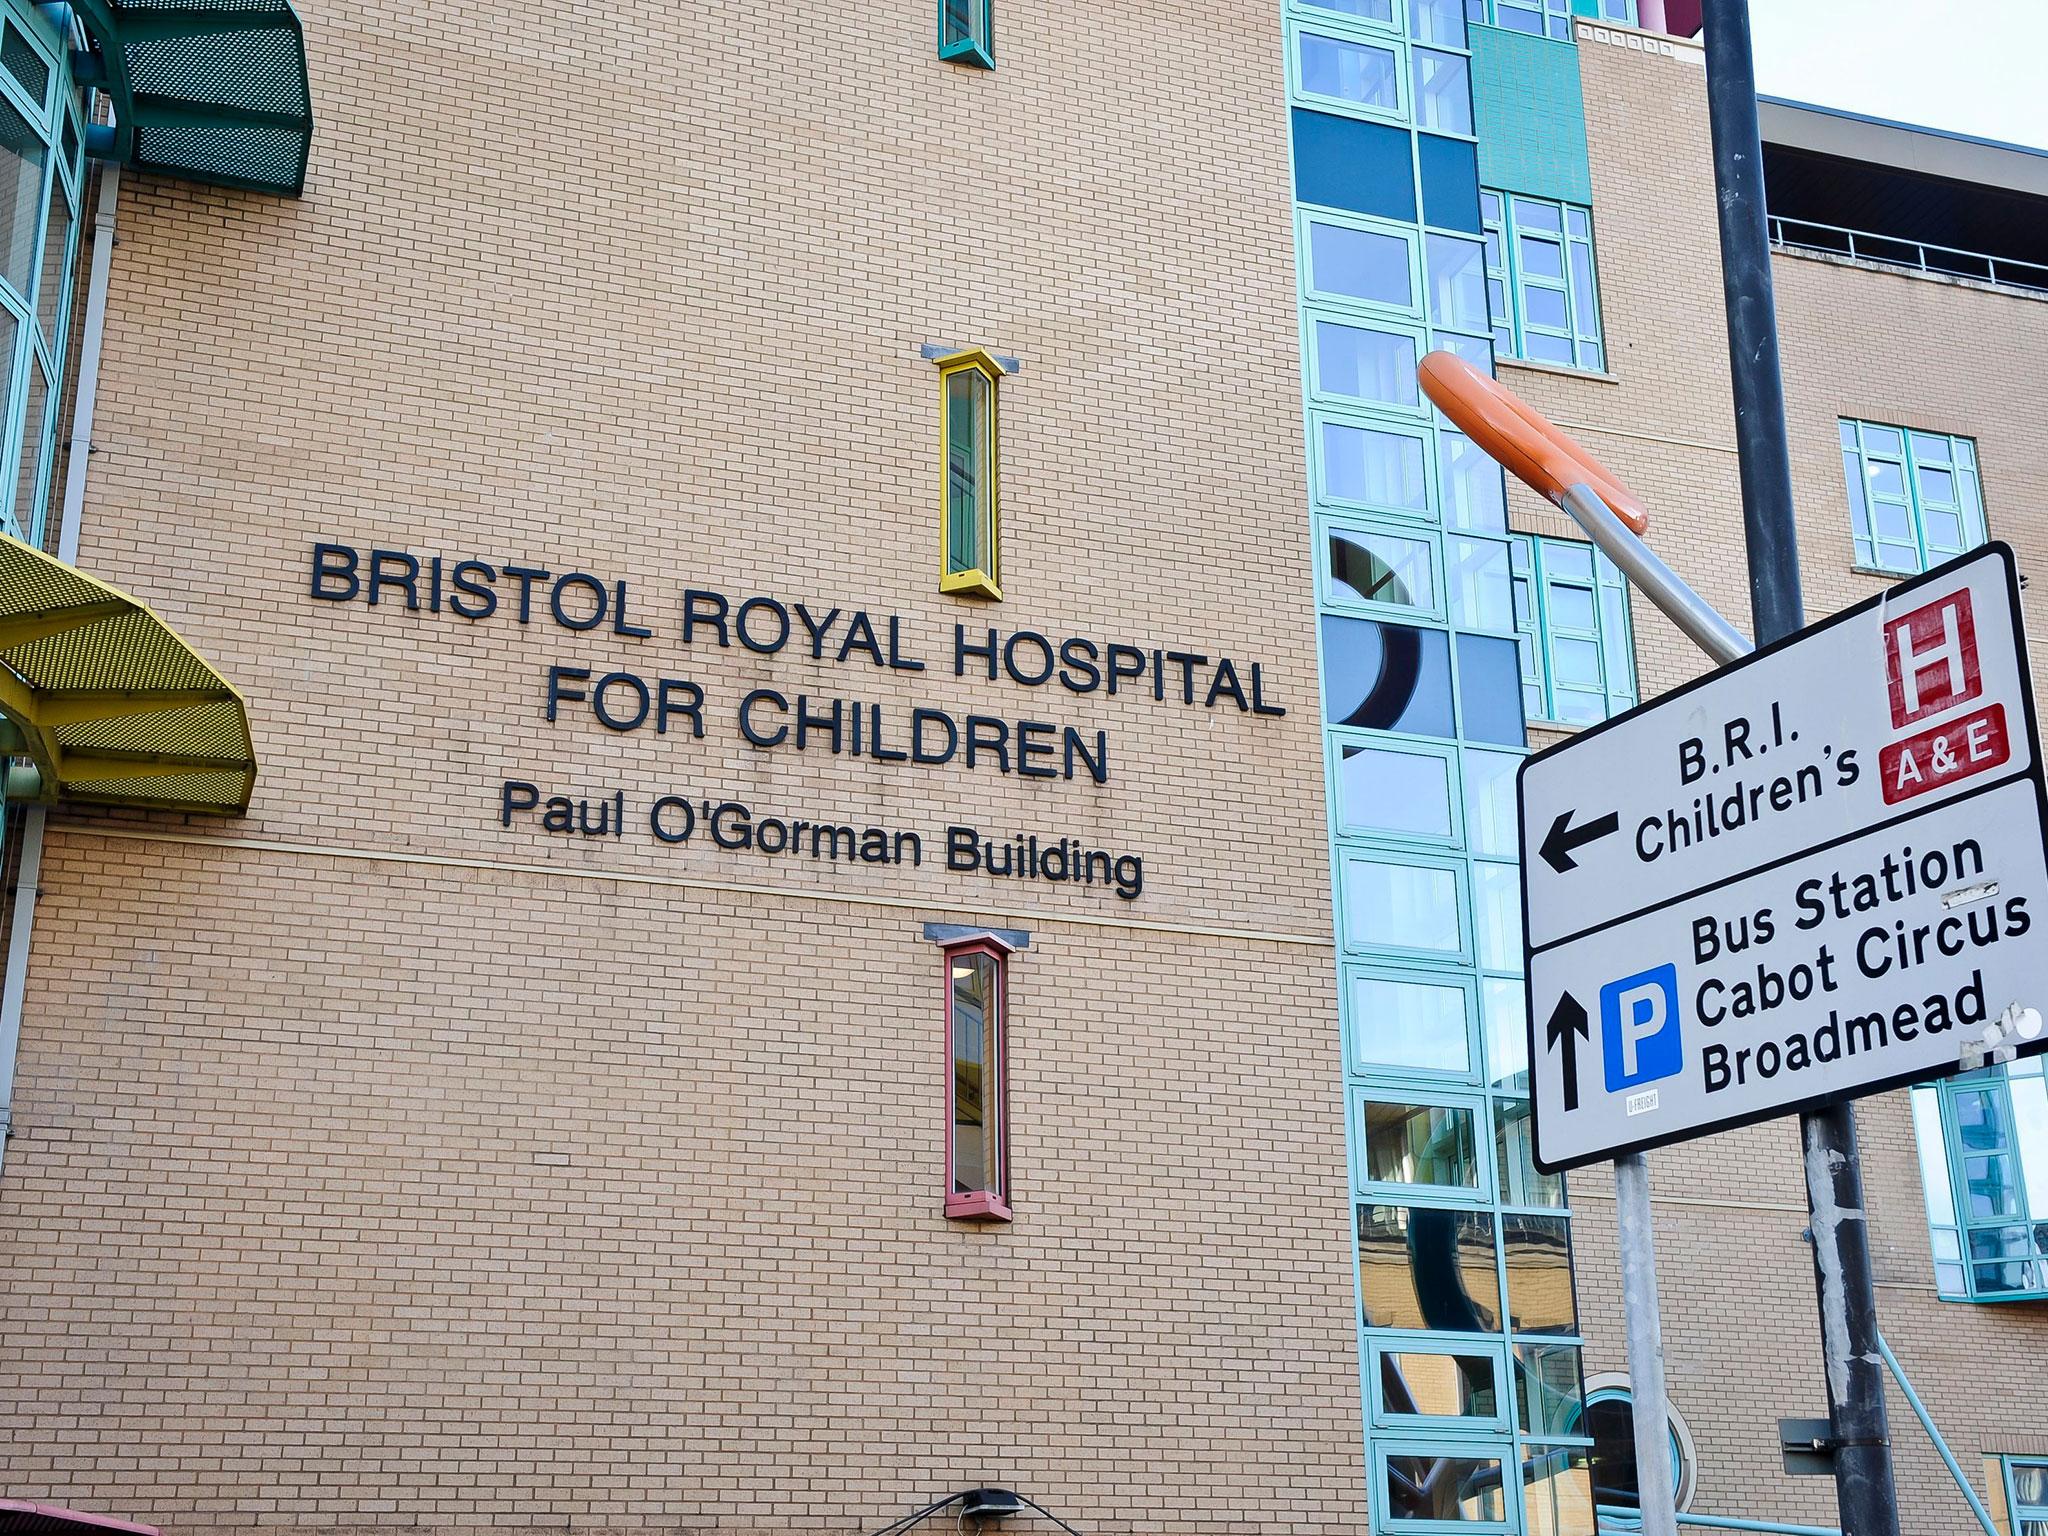 The girl remains in intensive care at Bristol Royal Hospital for Children